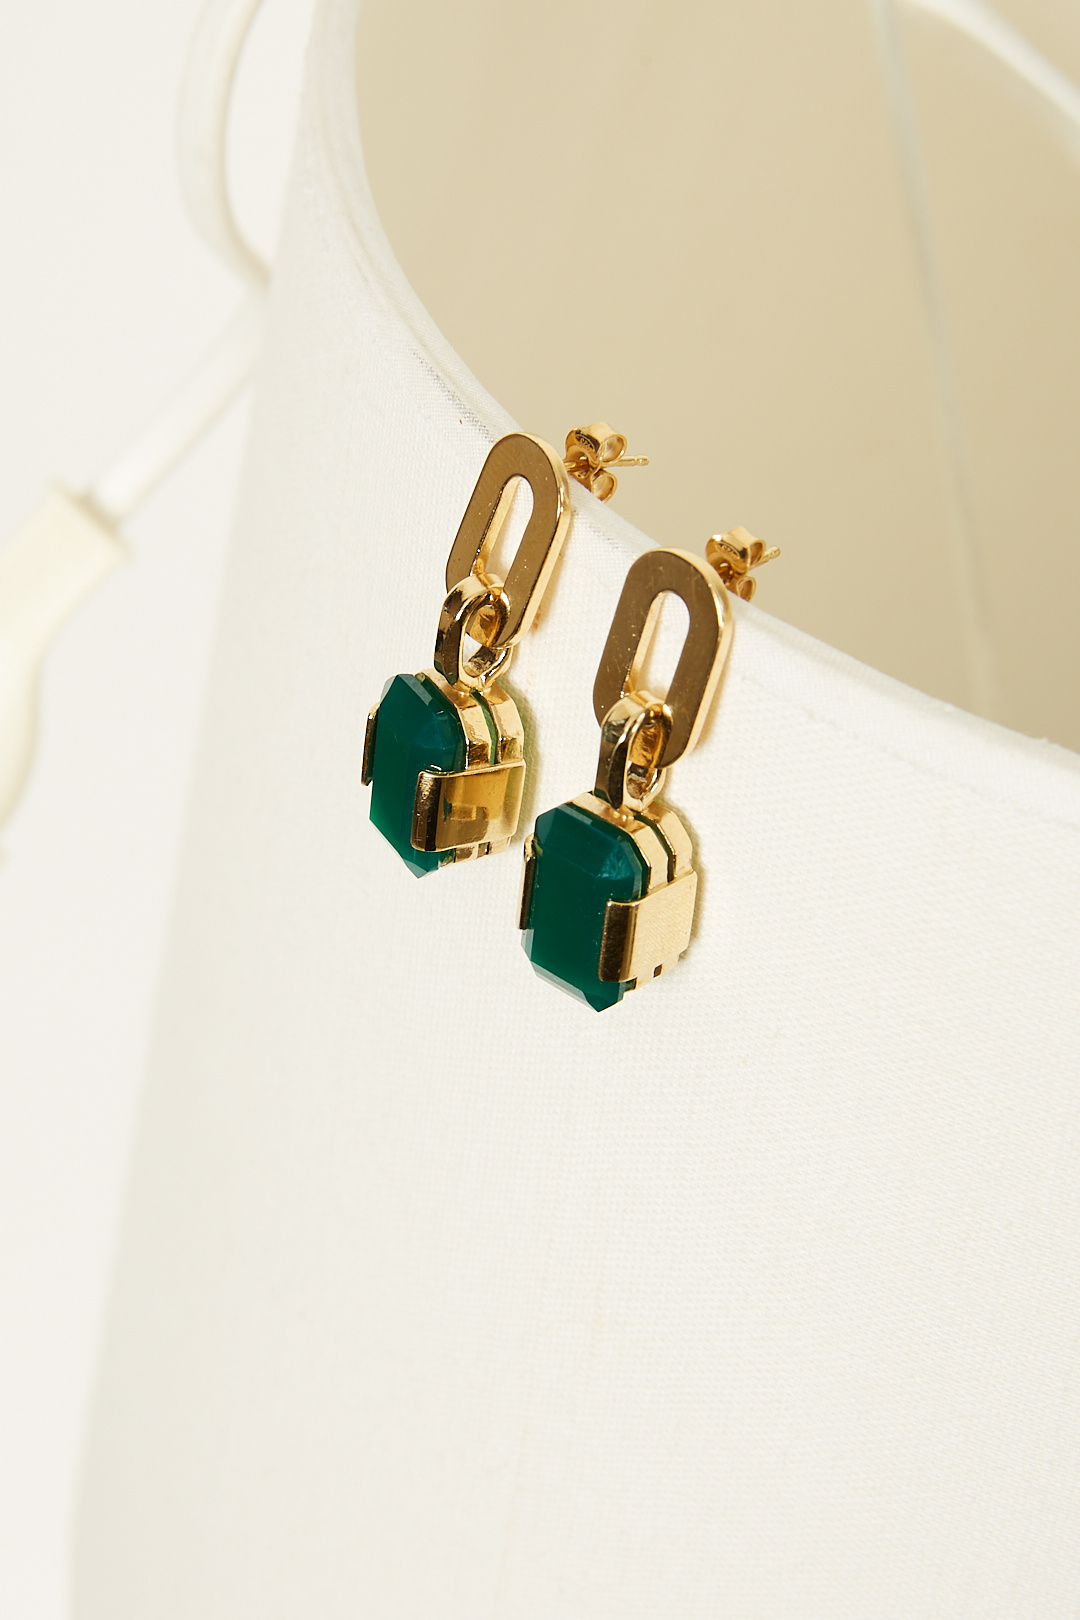 Studio Collect Heritage earrings with agate